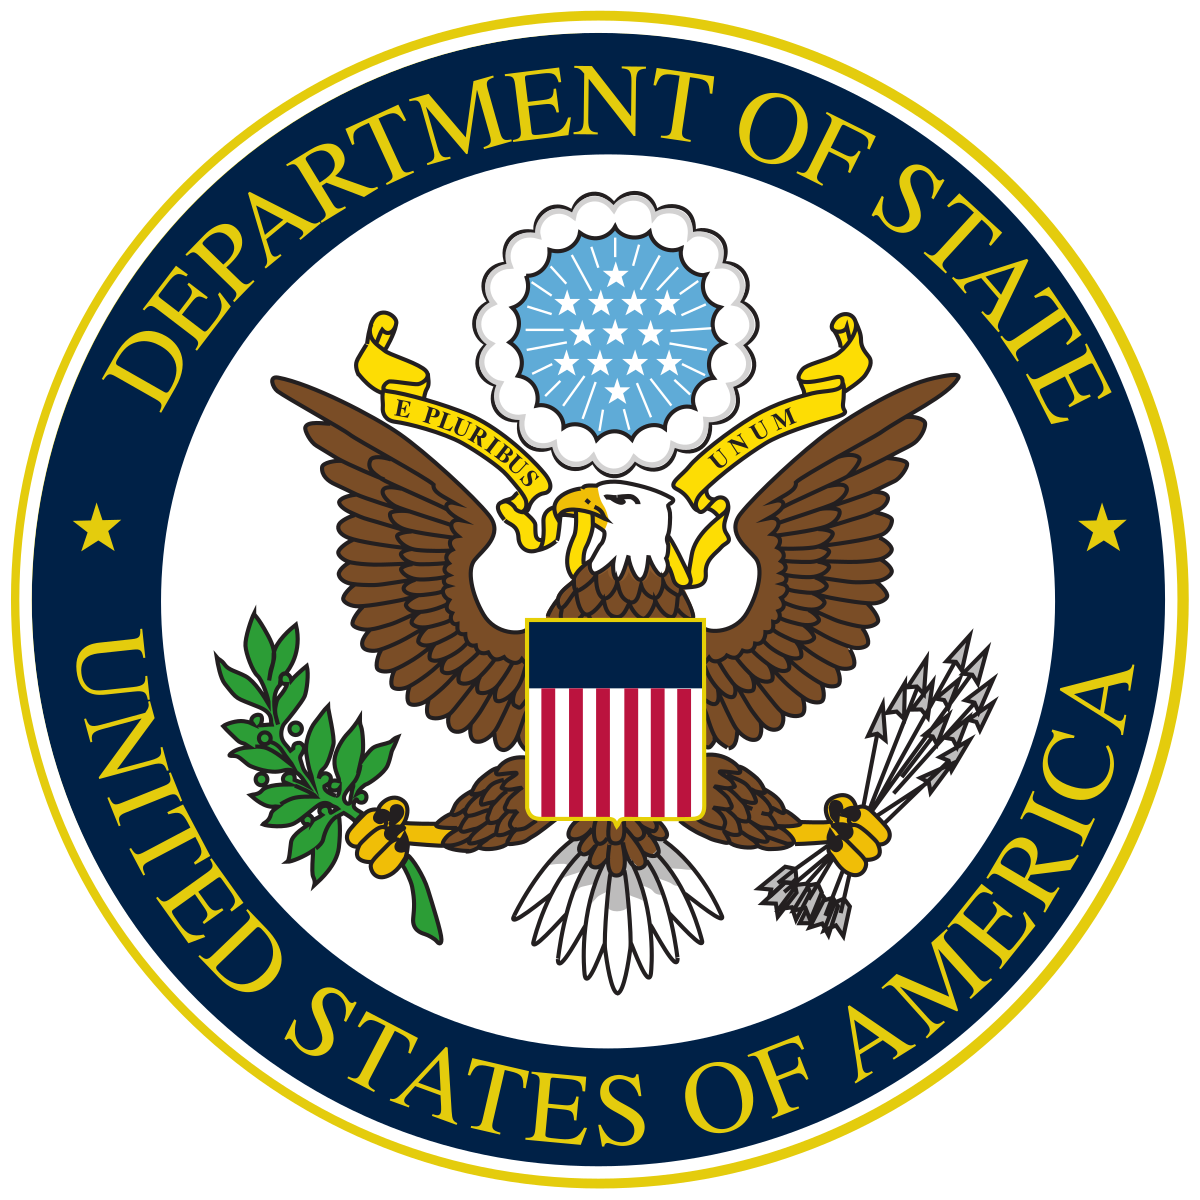 US Department of State official seal.svg